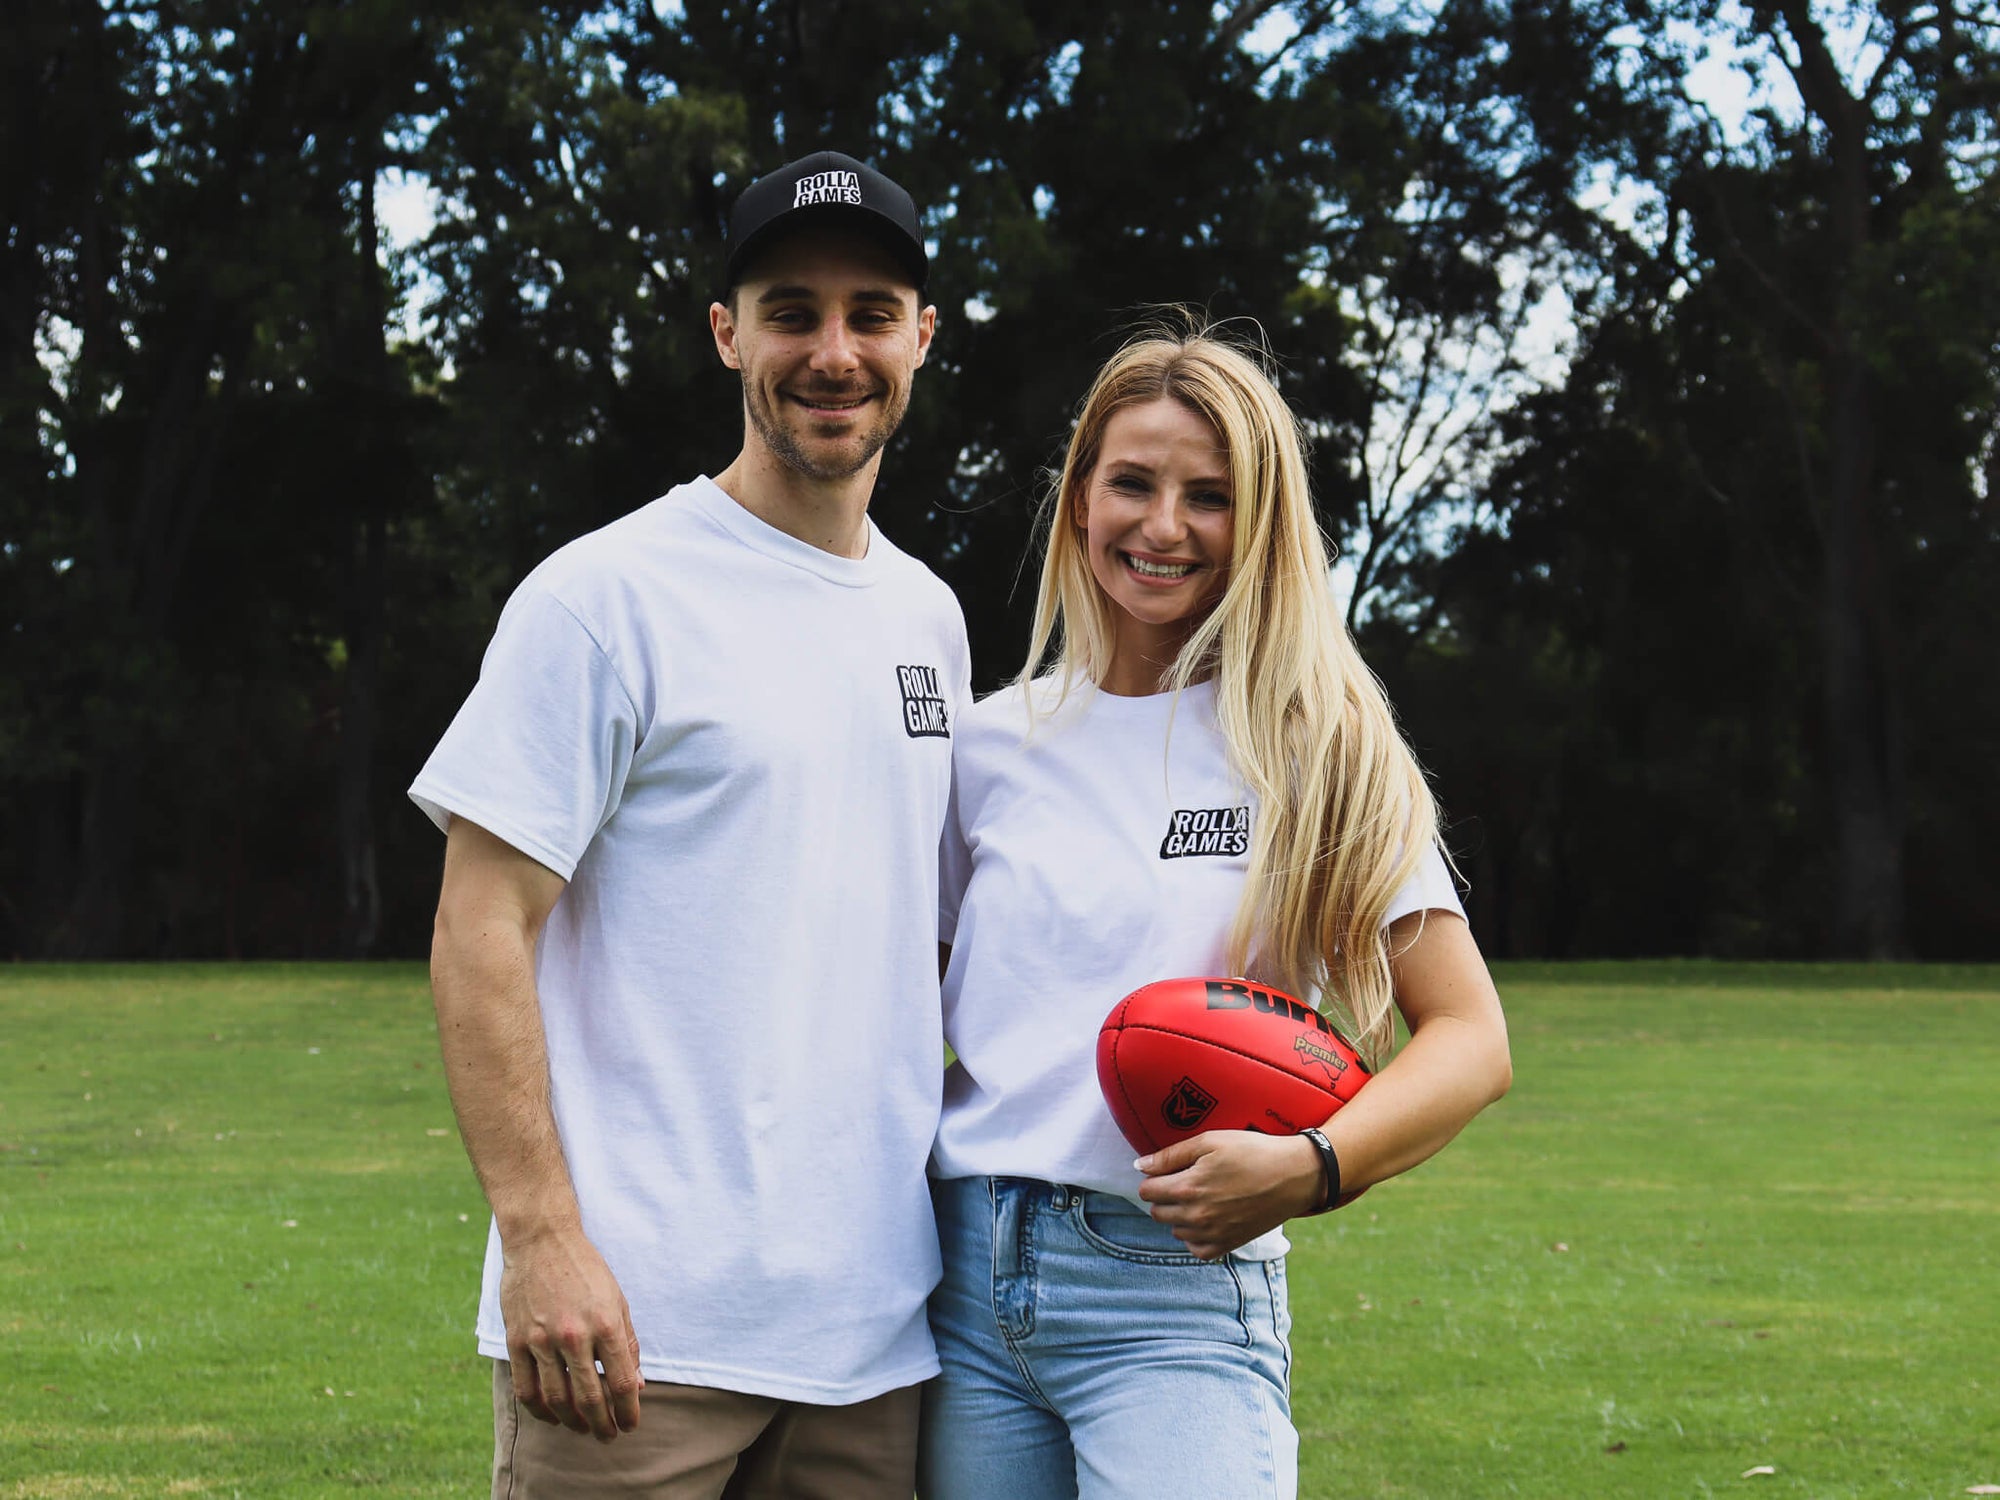 Male and female smiling, casually holding an AFL football.